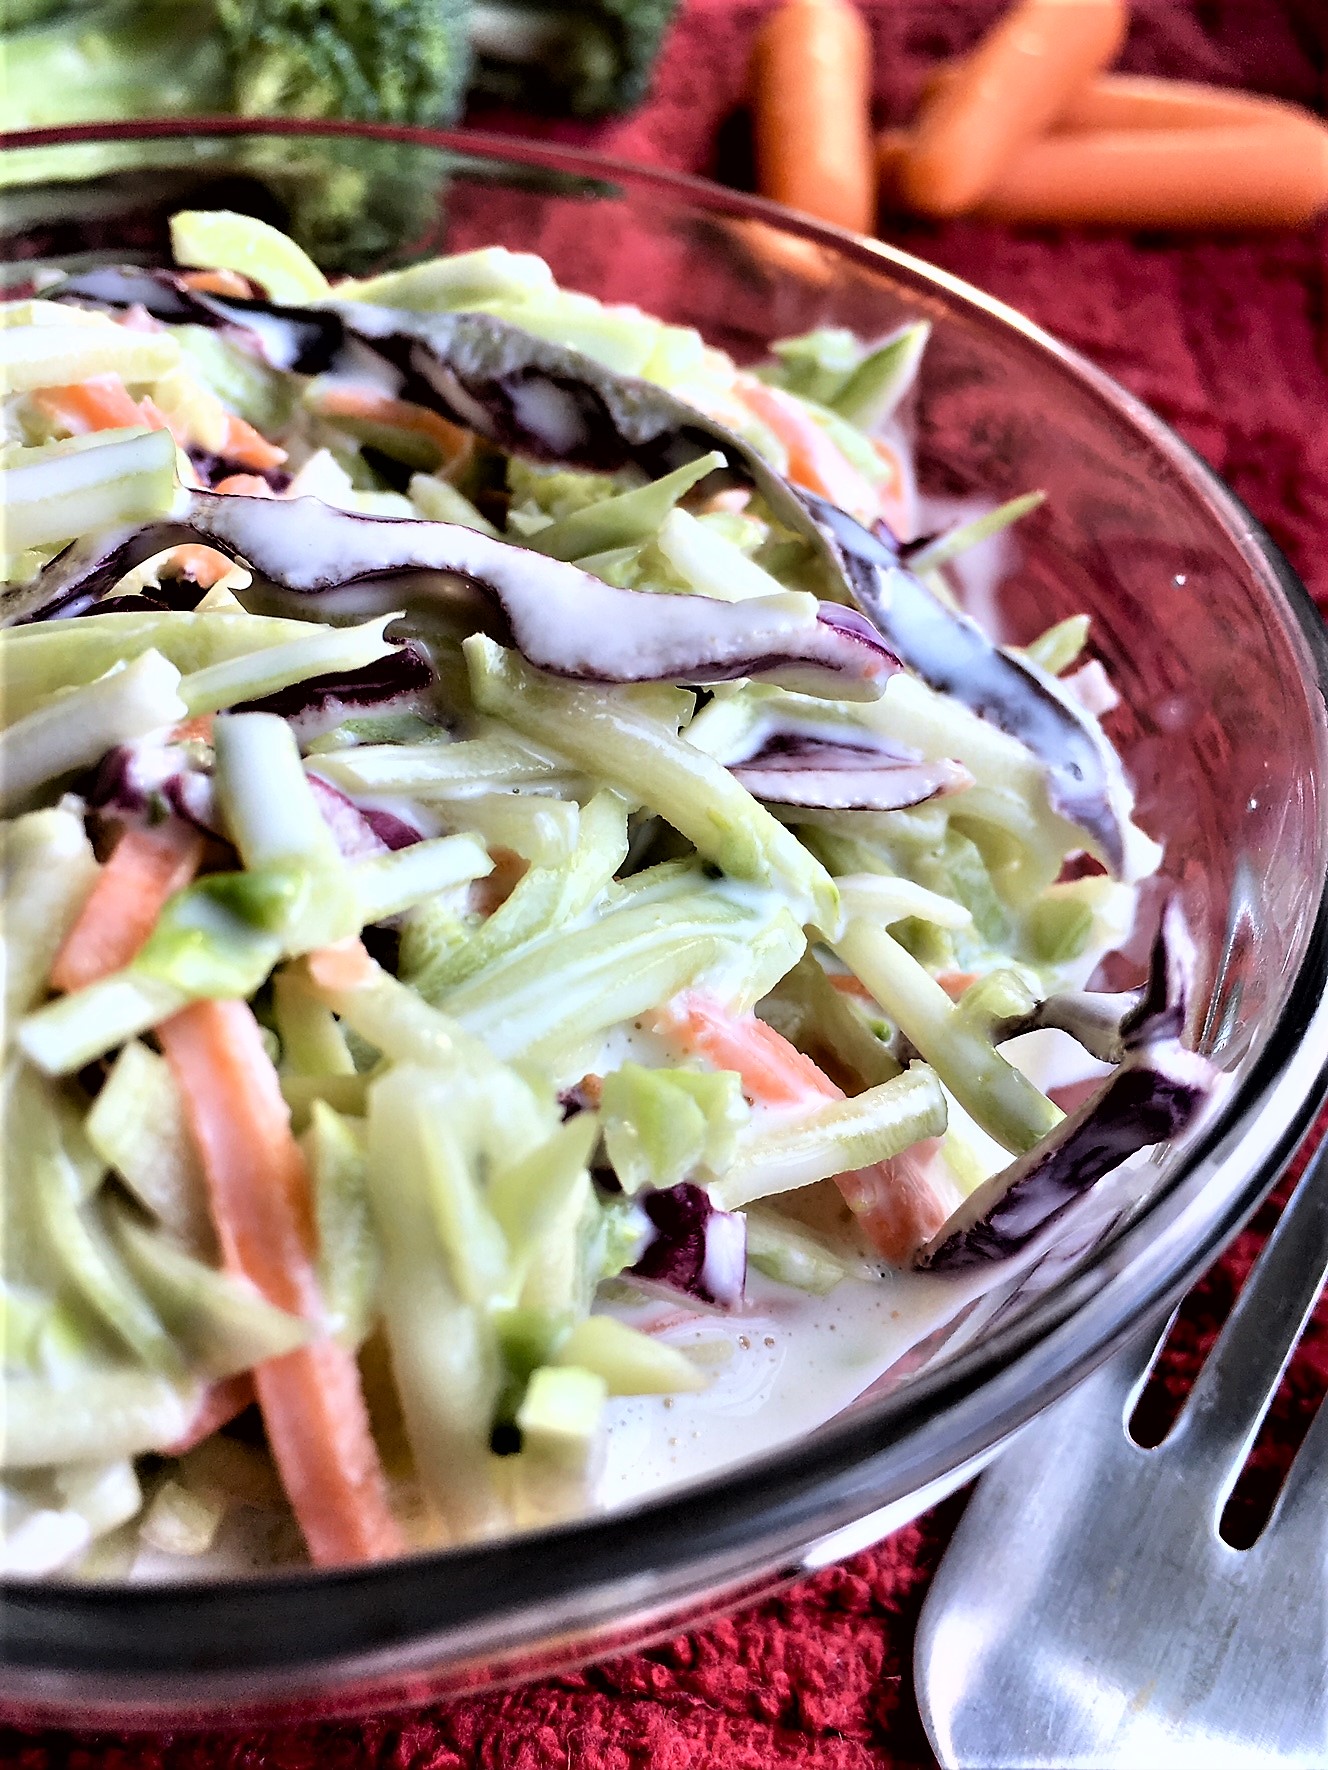 Easy Cabbage Stir-Fry - The Forked Spoon